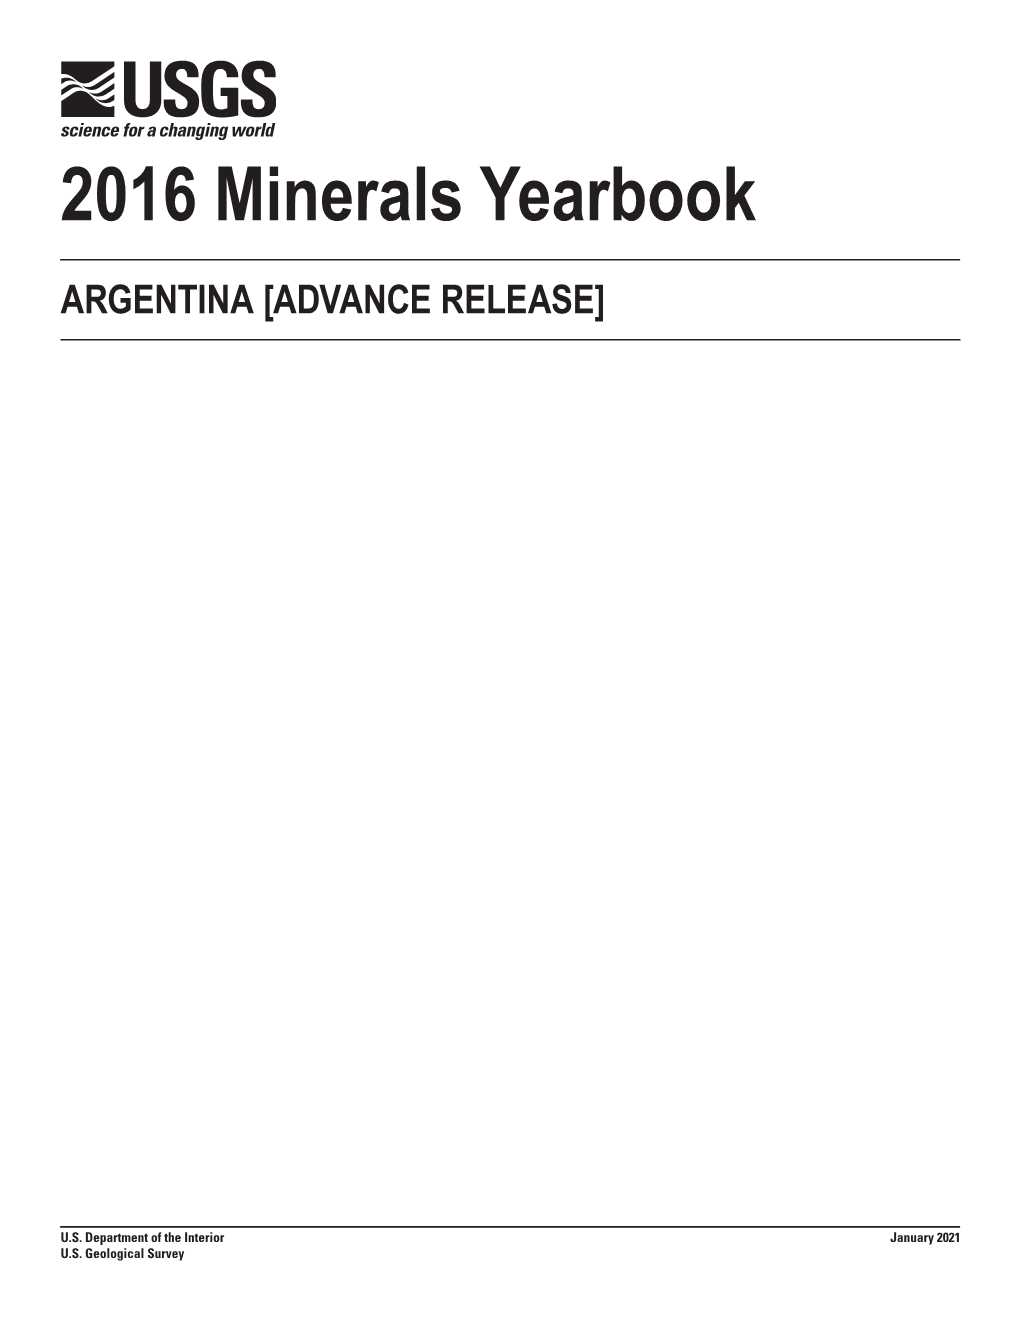 The Mineral Industry of Argentina in 2016